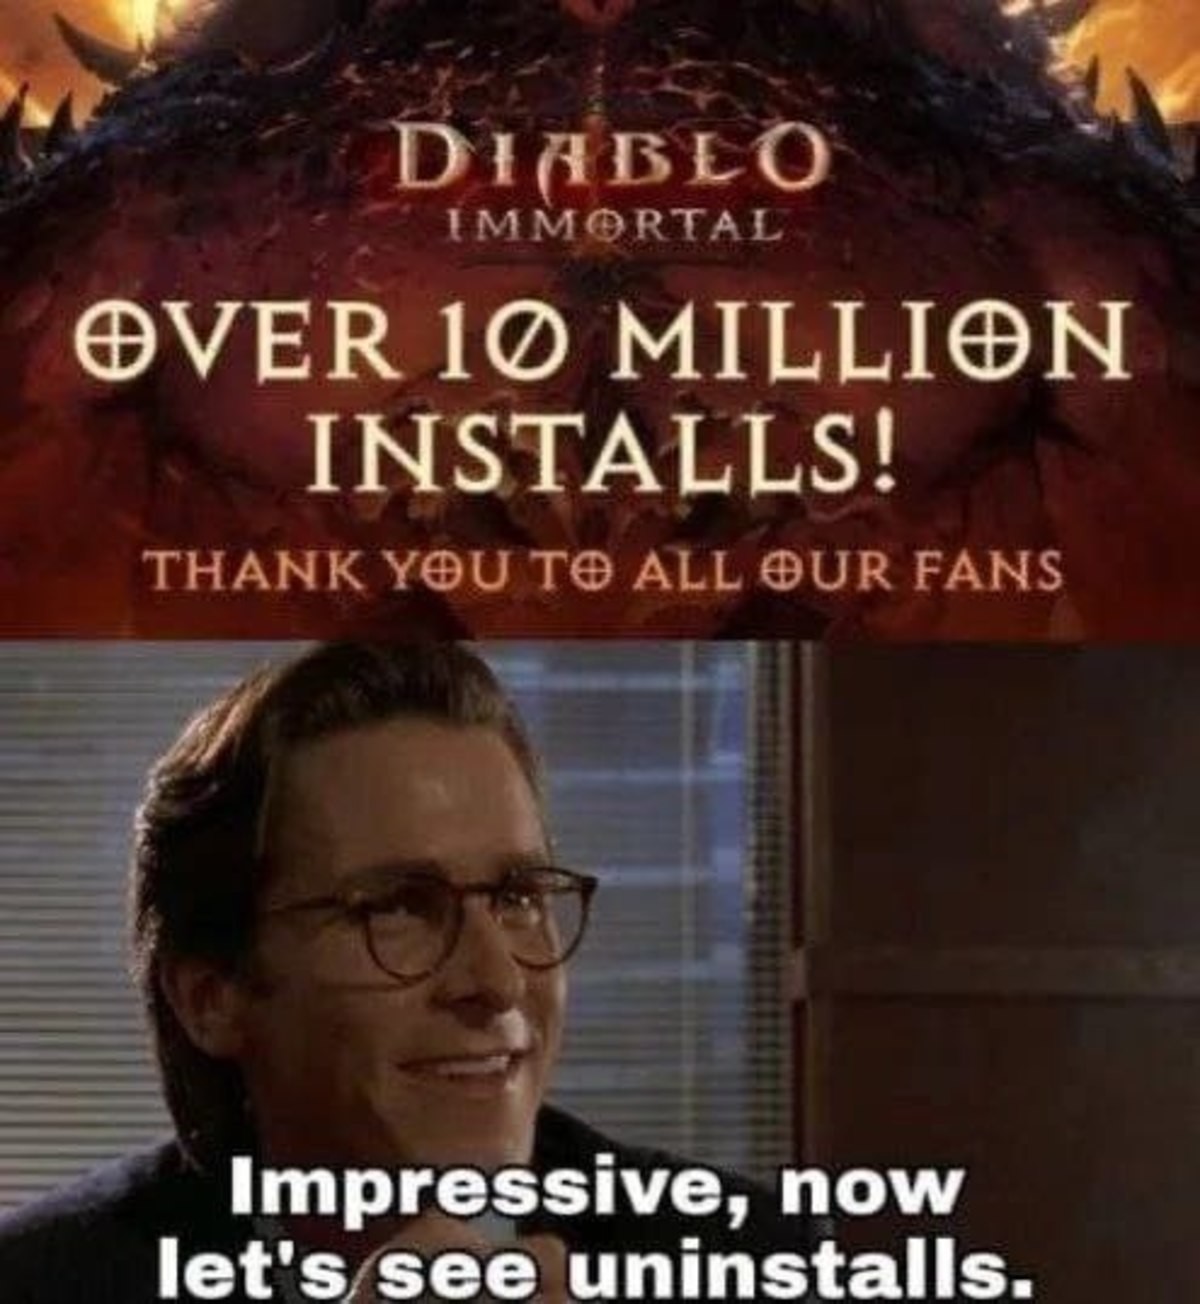 superb Gnu. .. I love how the rich who blow $100,000+ on it, in USD, think the game is awesome and definitely worth their time, money, and effort. It's just Diablo 3 imported 